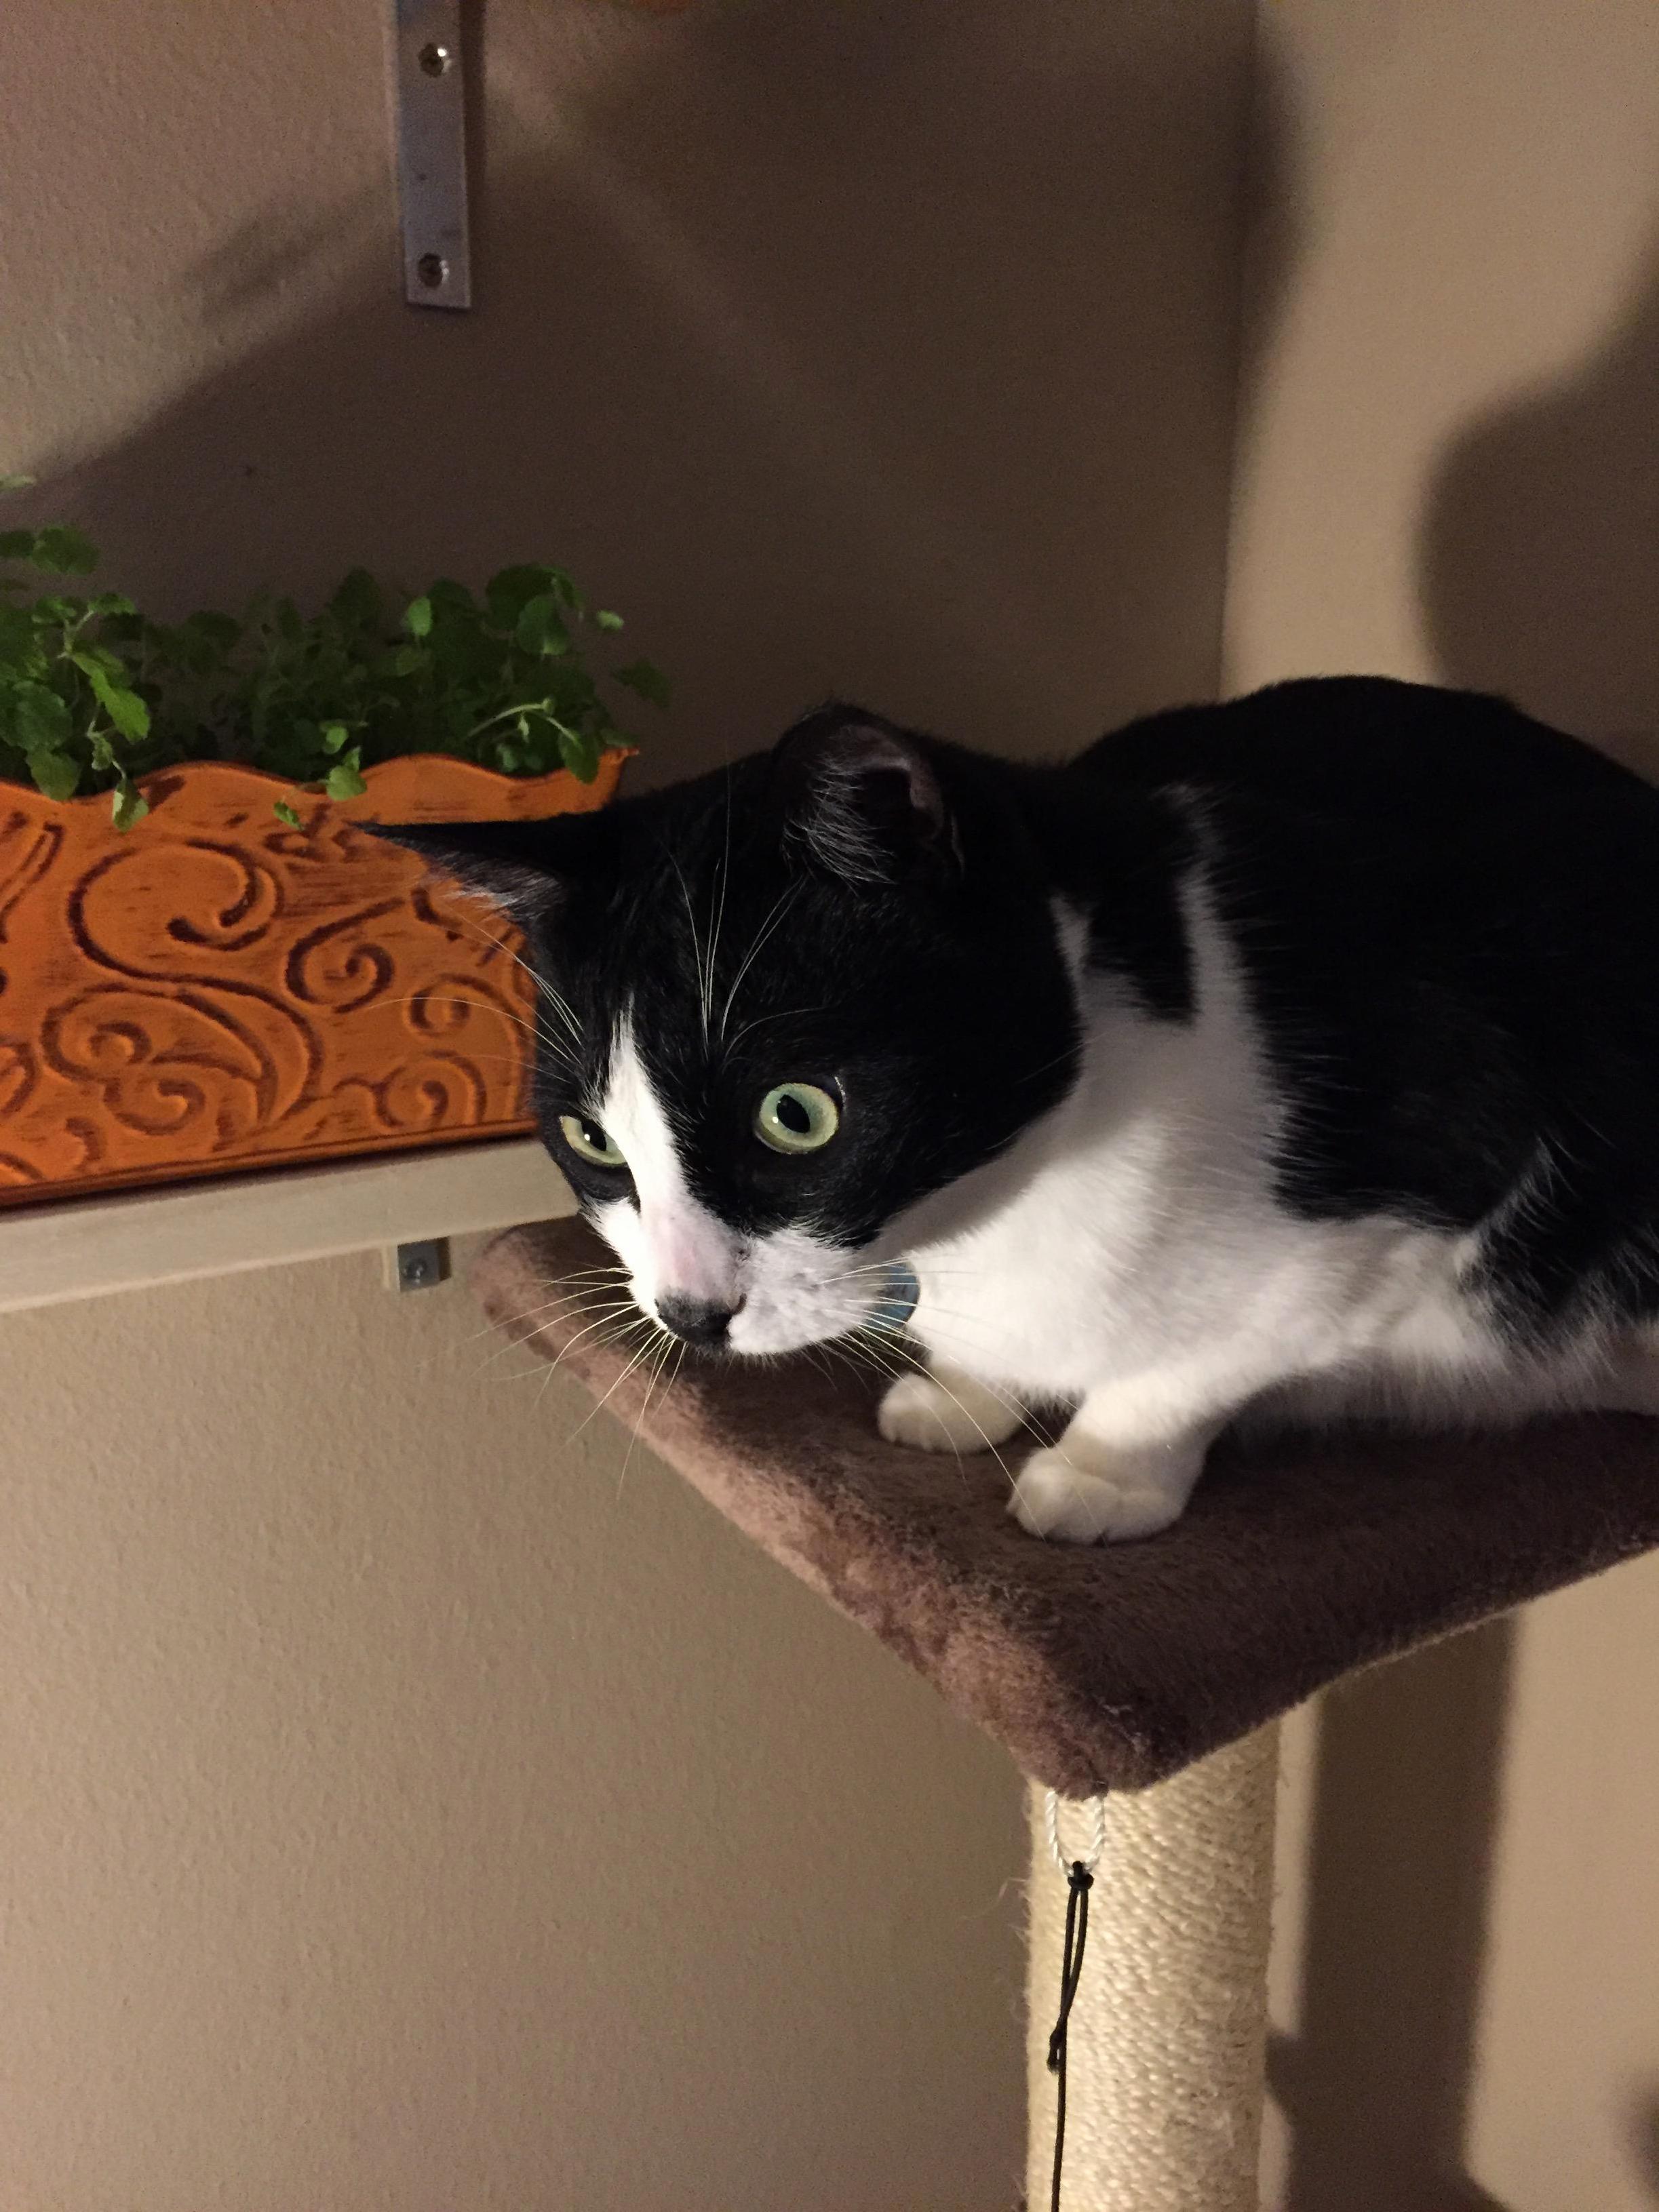 His face immediately after being introduced to his first catnip garden x post rpics